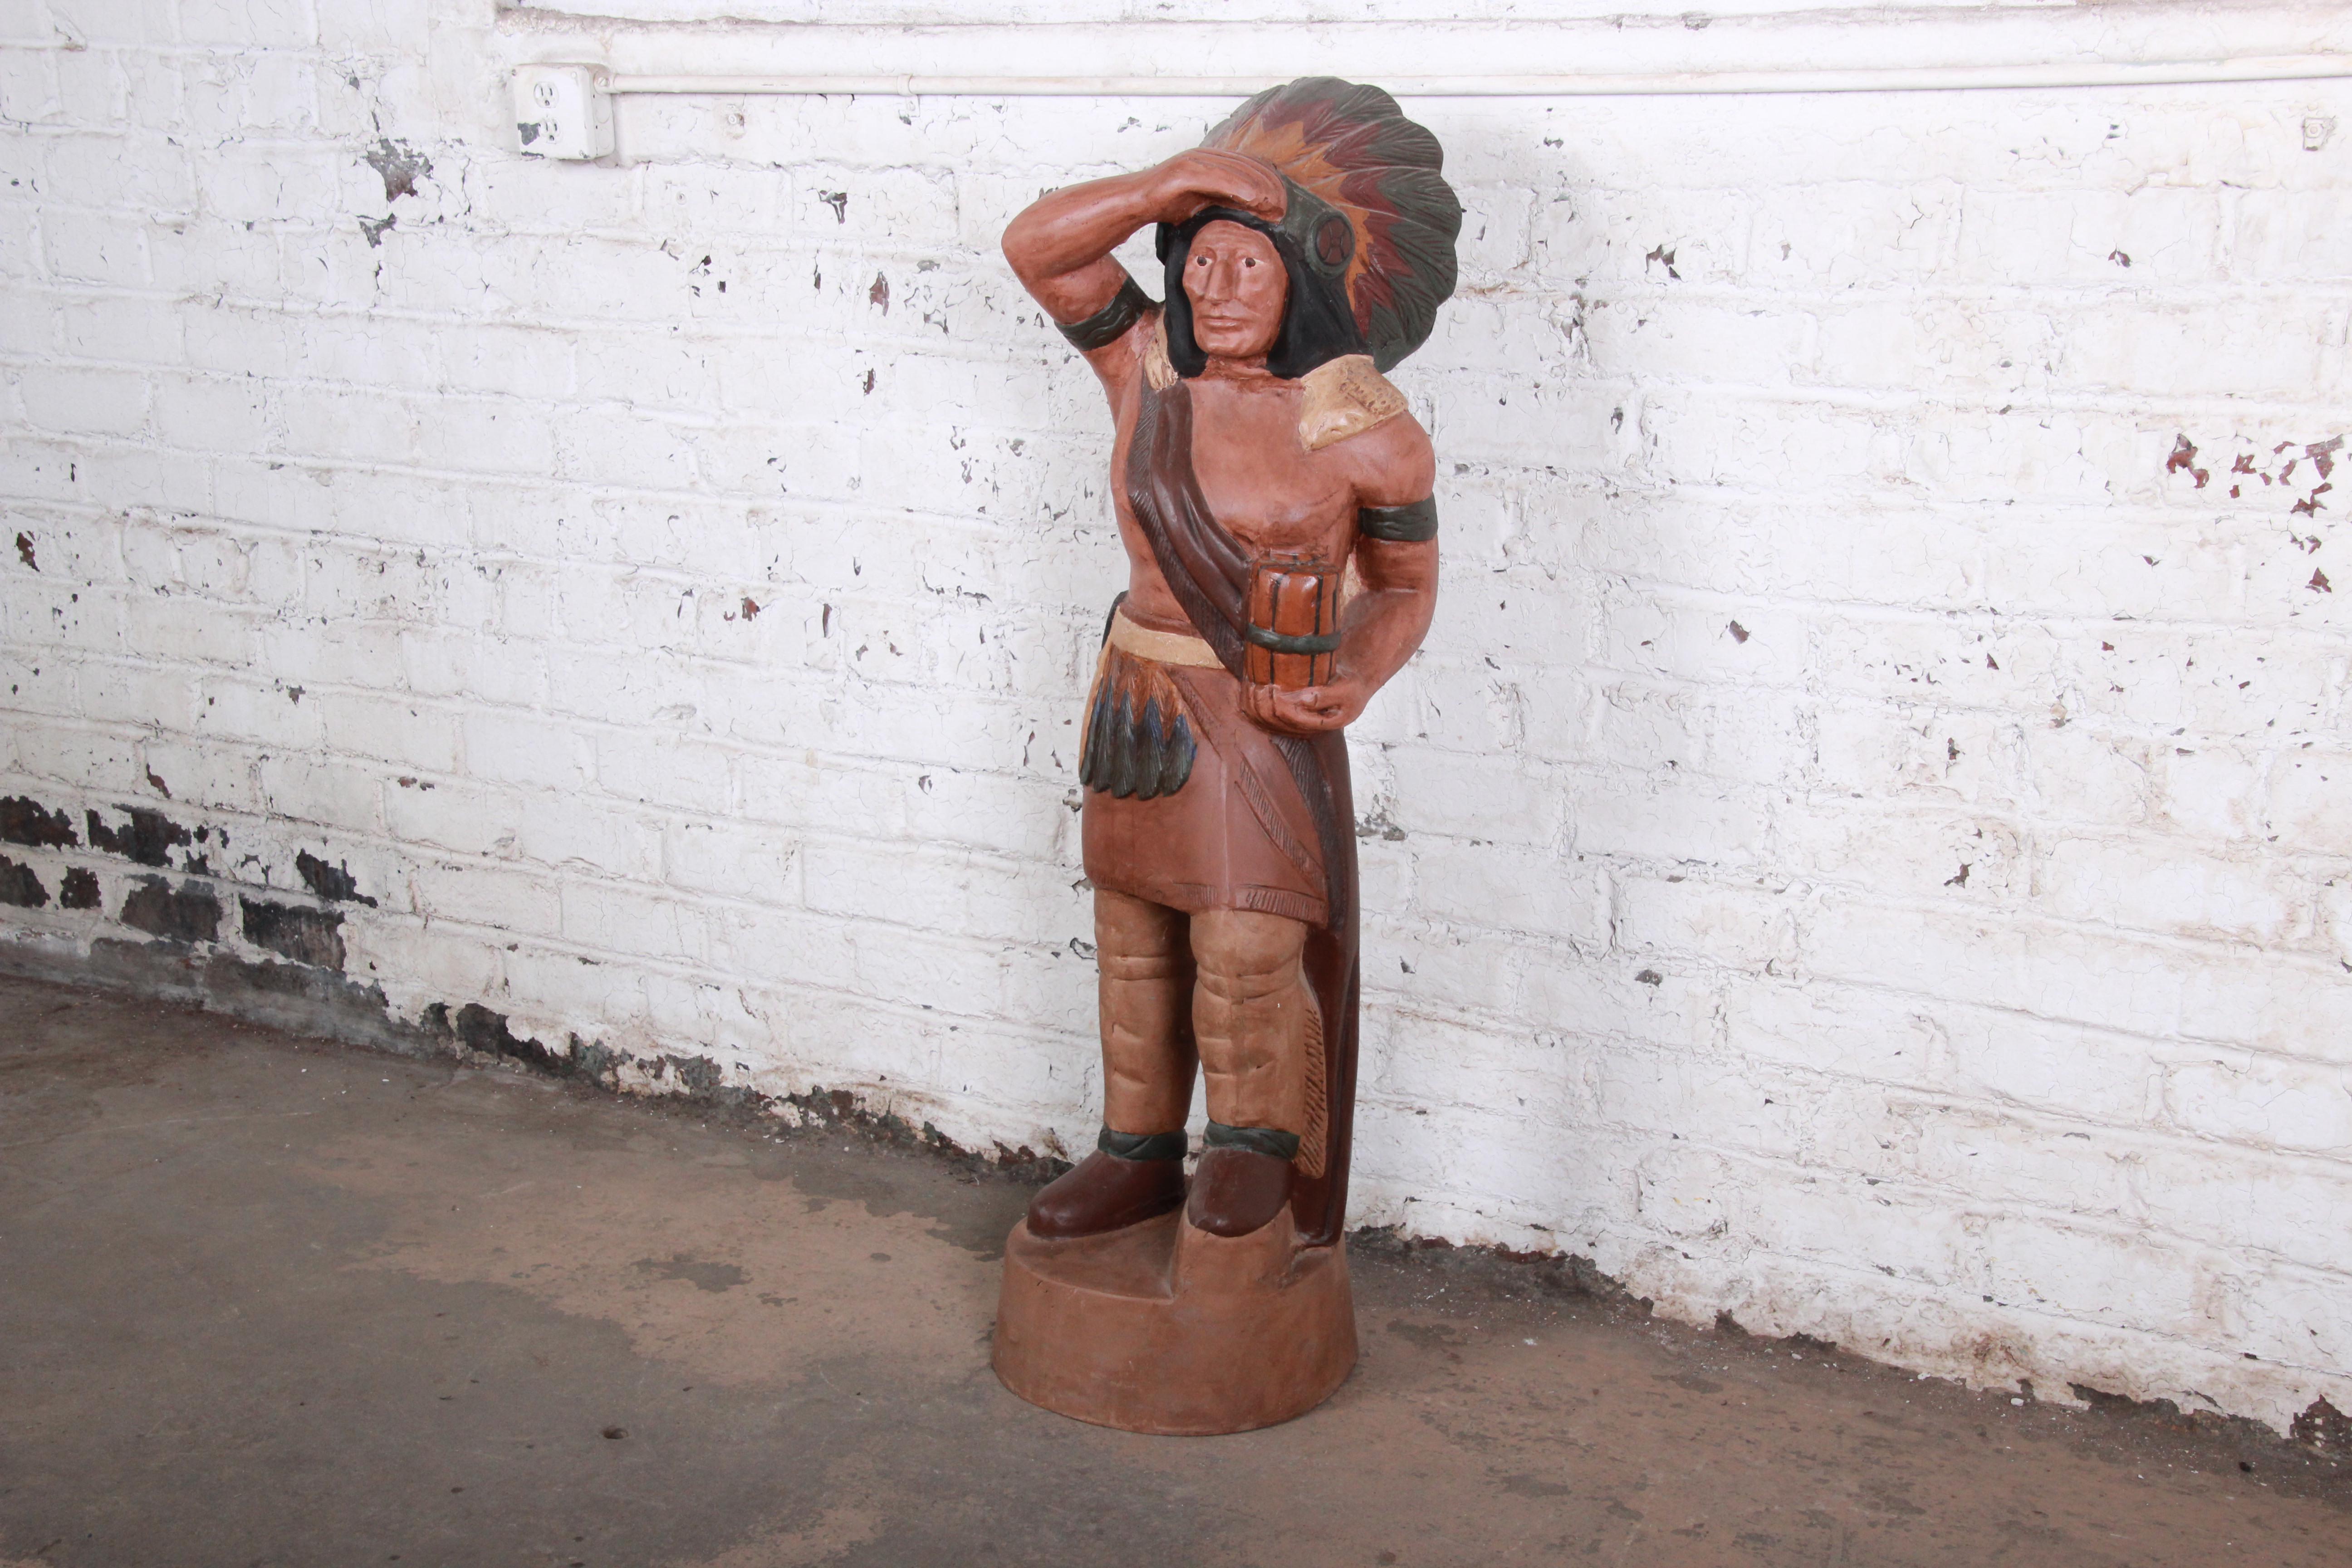 An iconic cigar store Indian statue, featuring an Indian chief in traditional headdress. Wonderfully painted in detail over cast metal. The statue is heavy and sturdy. It is in excellent original vintage condition.

Measures: 15